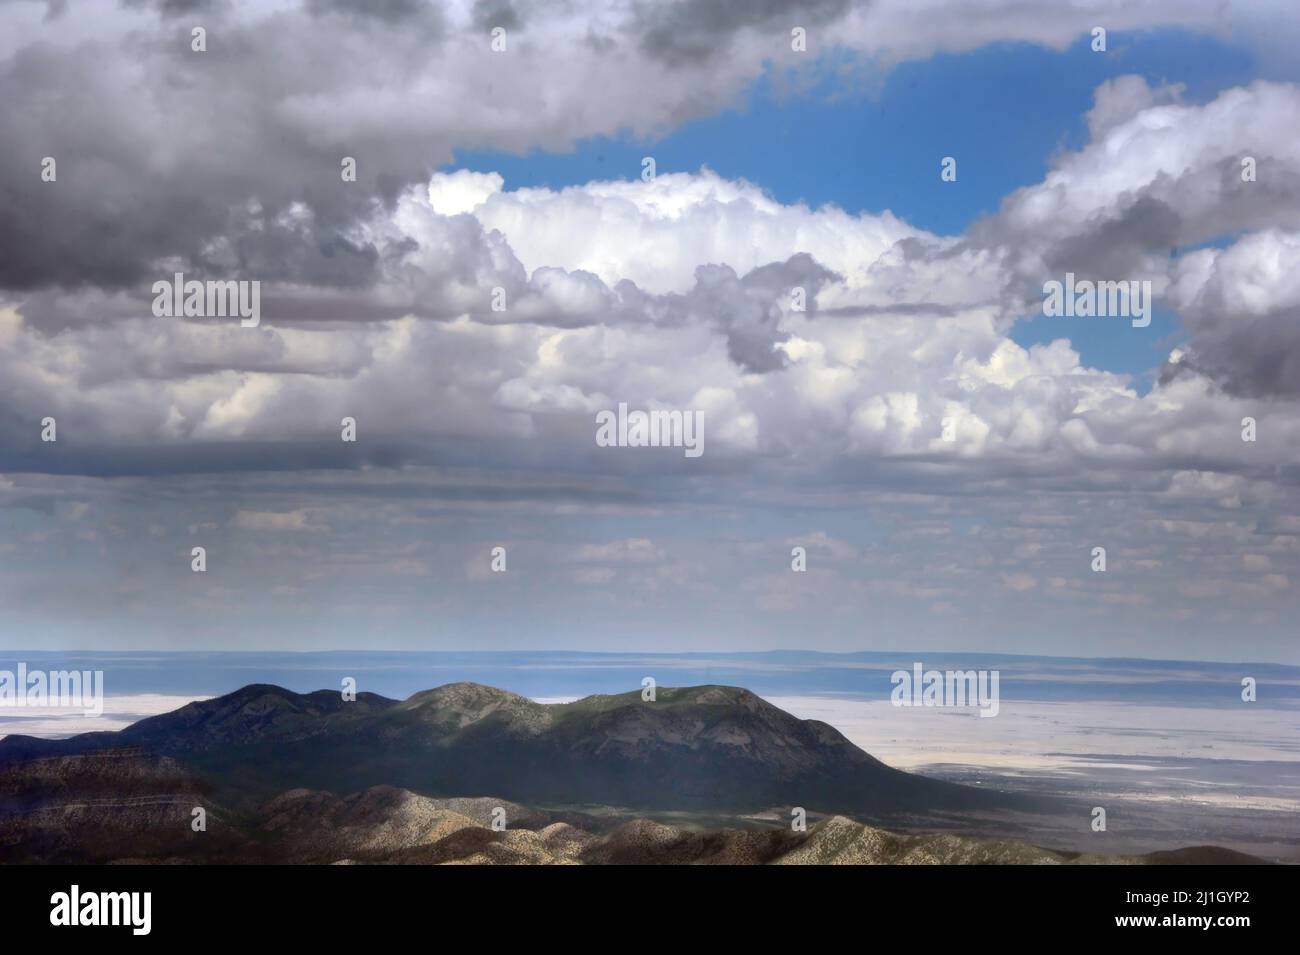 Rain, storm and dark thunderous clouds approach from the East, towards the Crest of the Sandia Mountains near Albuquerque, New Mexico. Stock Photo